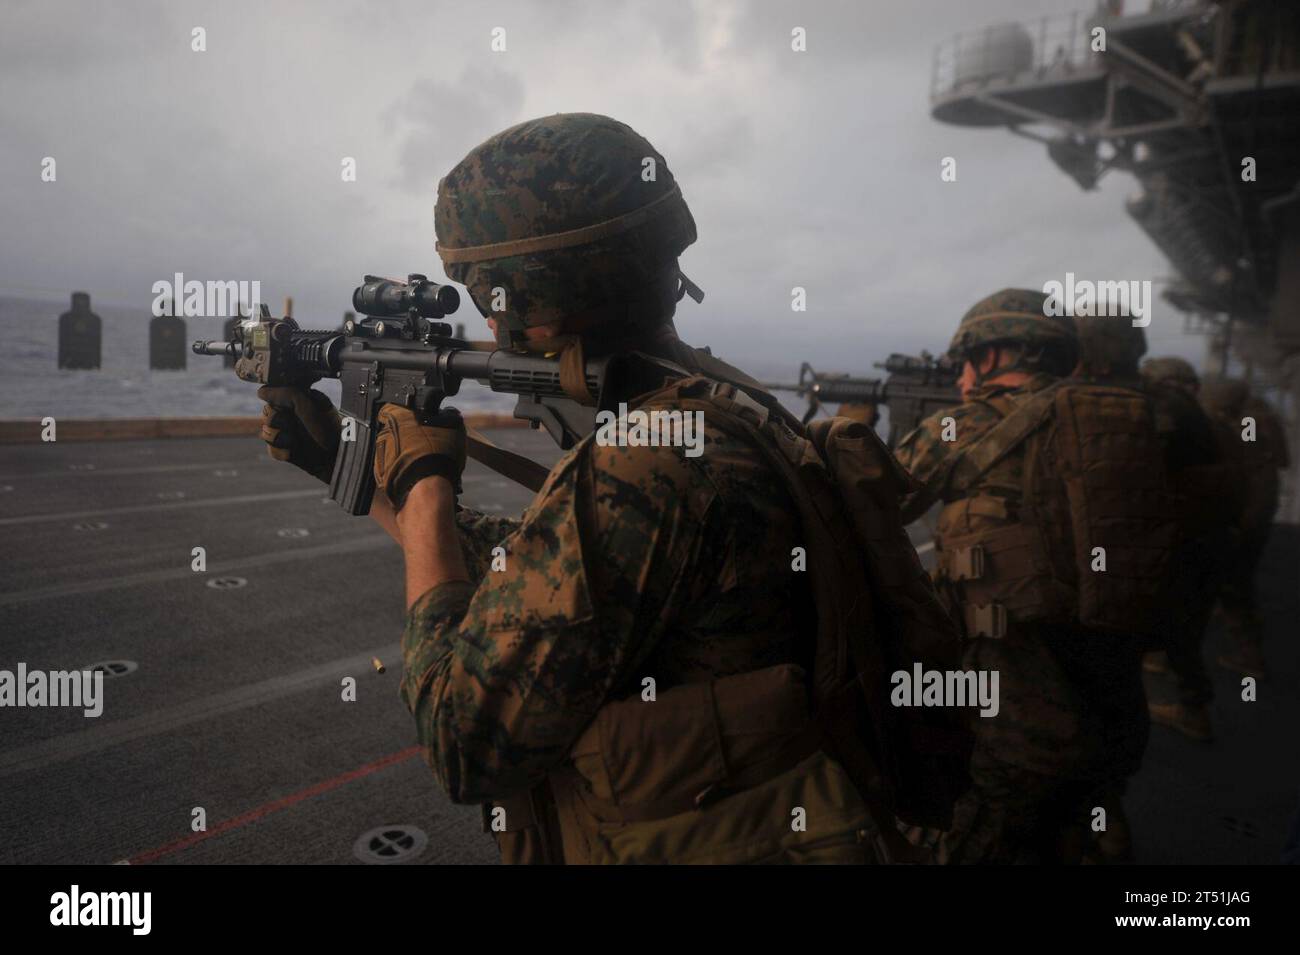 111206CR943-003 PACIFIC OCEAN (Dec. 6, 2011) Marines assigned to Battalion Landing Team 3/1 of the 11th Marine Expeditionary Unit (11th MEU) shoot at silhouette targets aboard the amphibious assault ship USS Makin Island (LHD 8). The unit embarked Makin Island, the amphibious transport dock ship USS New Orleans (LPD 18) and the amphibious dock landing ship USS Pearl Harbor (LSD 52) in San Diego Nov. 14 to begin a seven-month deployment to the western Pacific and Middle East regions. (U.S. Marine Corps Stock Photo